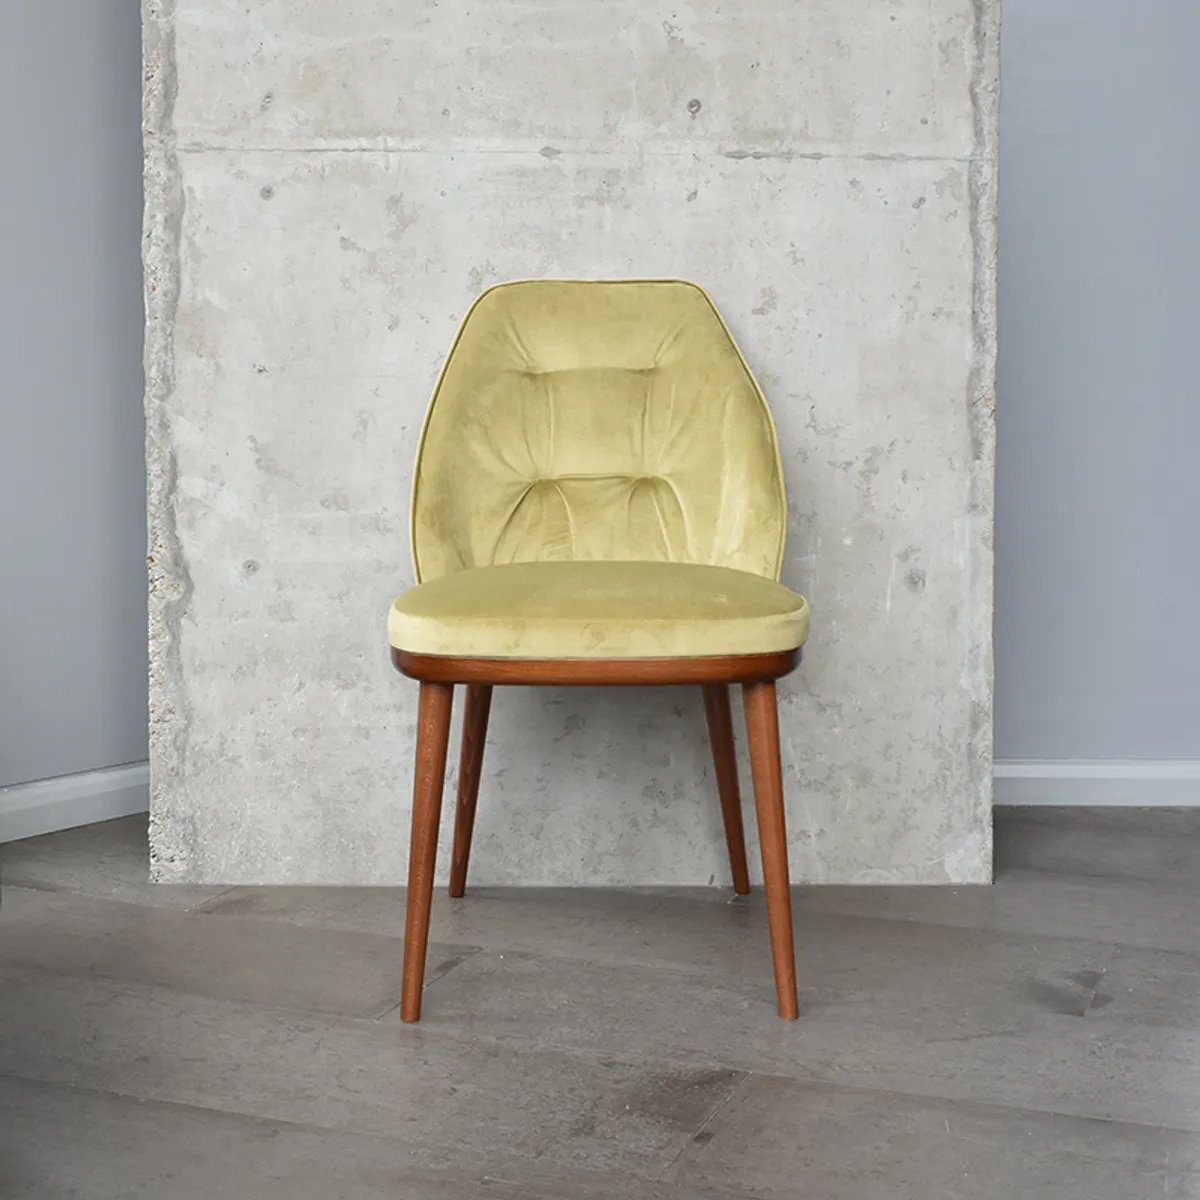 Cremant Side Chair New Furniture From Milan 2019 By Inside Out Contracts 040